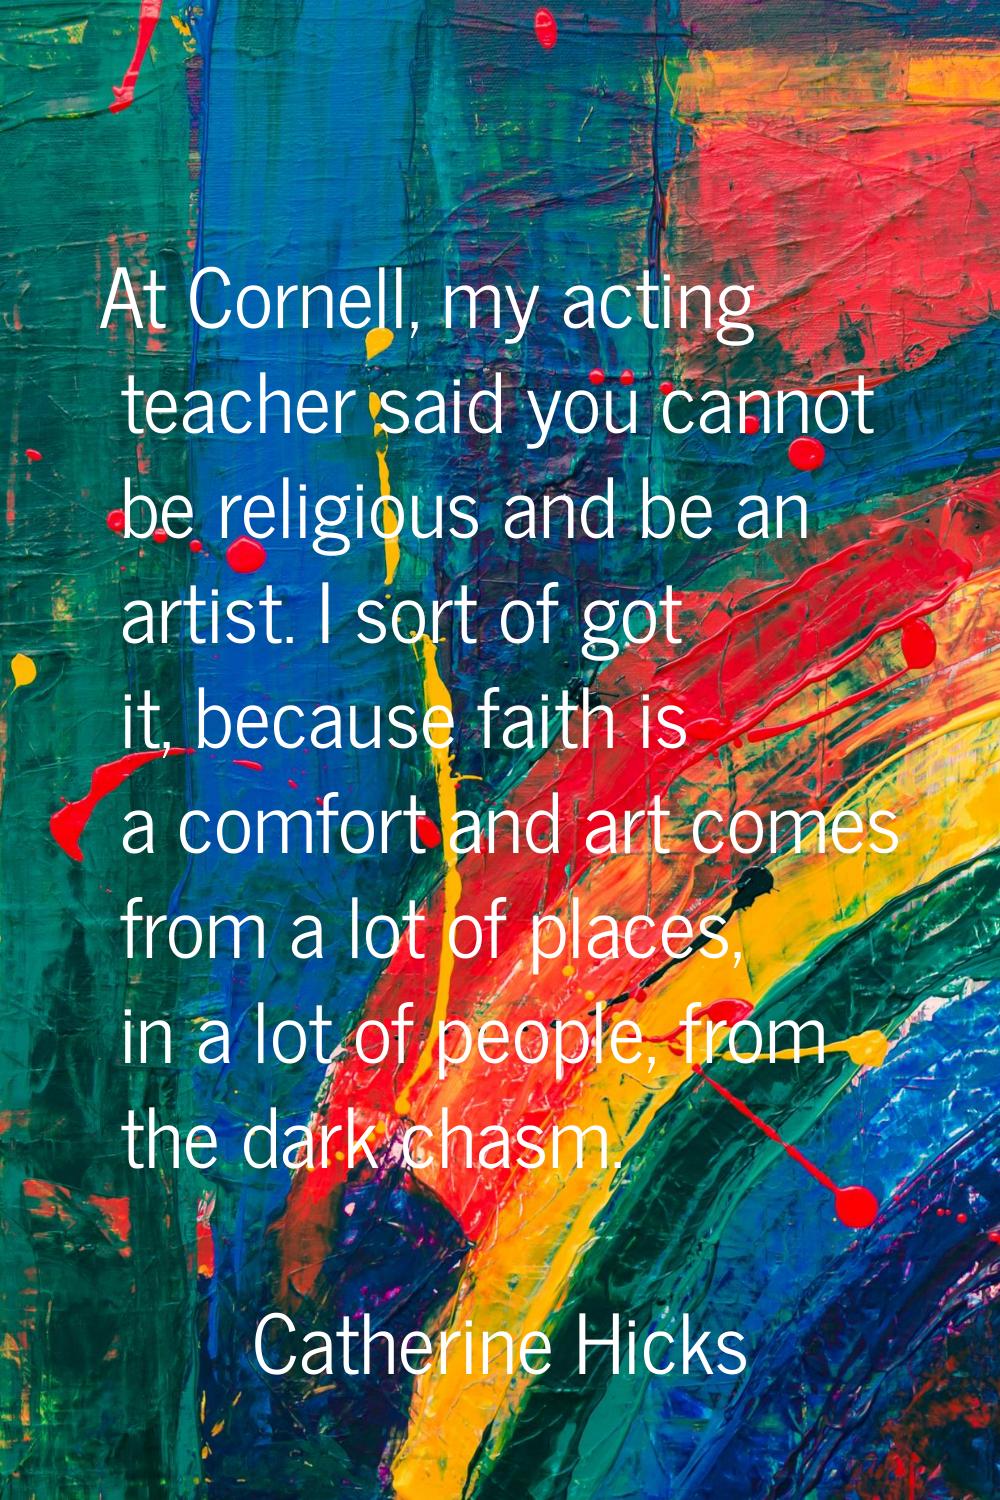 At Cornell, my acting teacher said you cannot be religious and be an artist. I sort of got it, beca